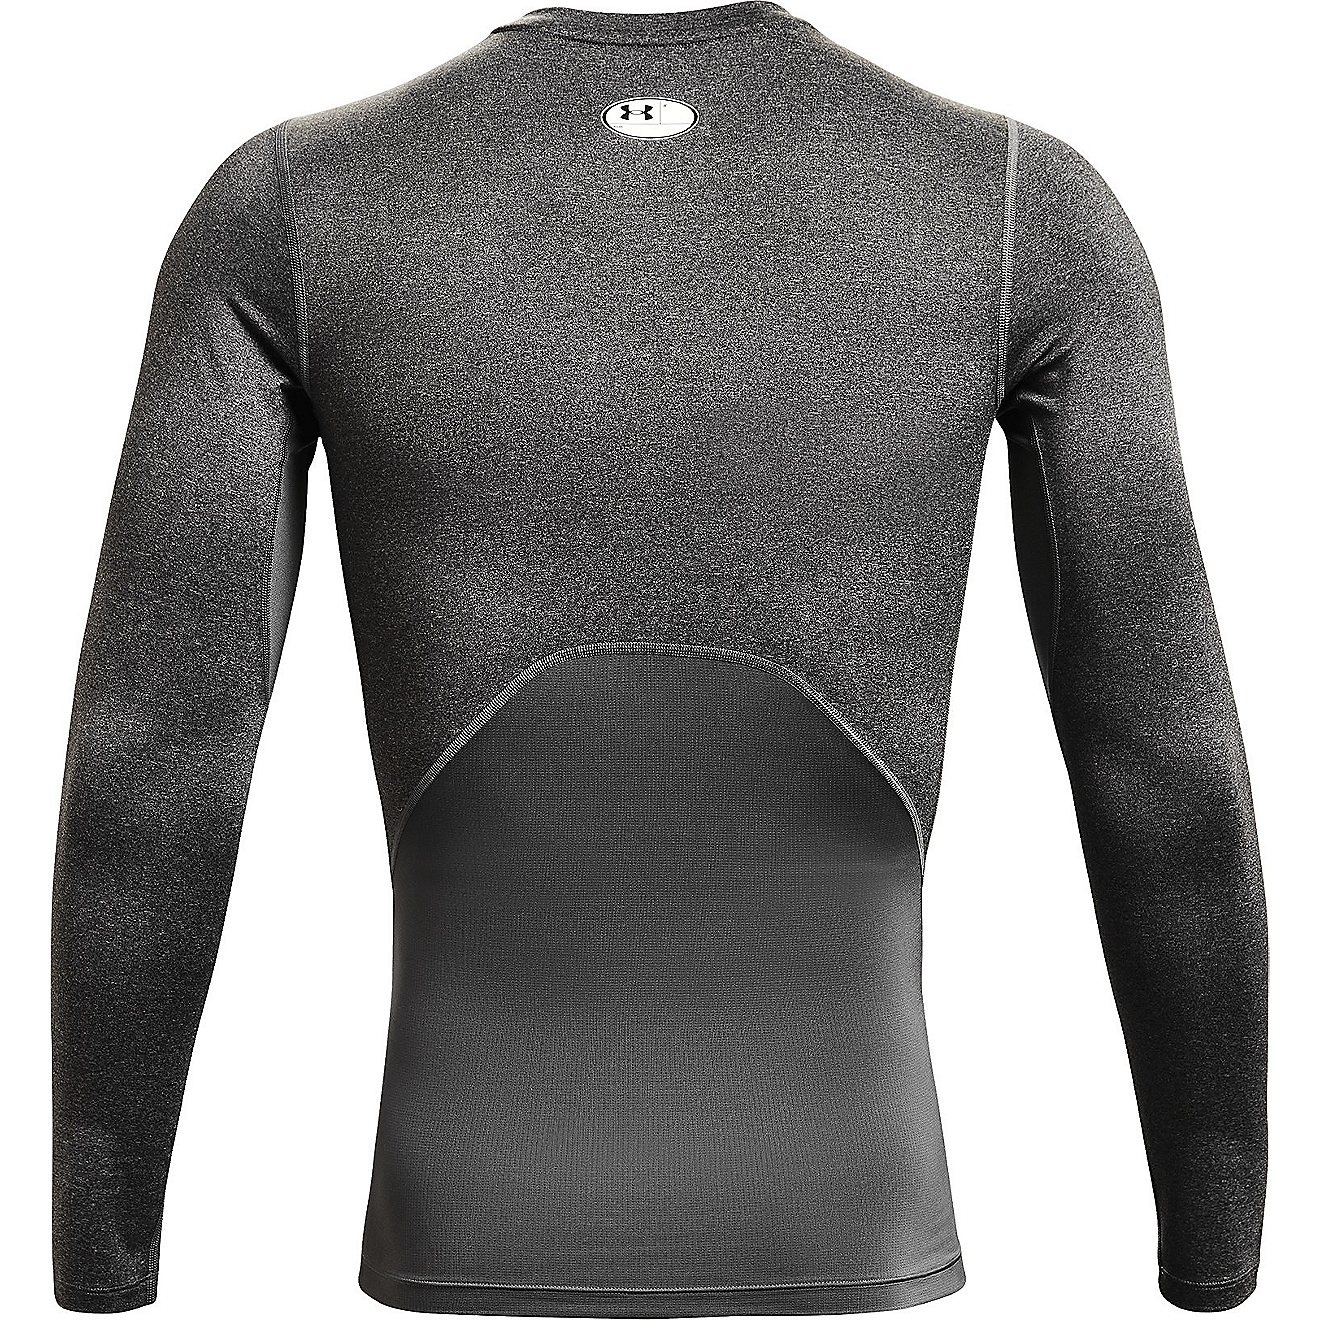 Under Armour Men's HeatGear Armour Comp Long Sleeve Top                                                                          - view number 2